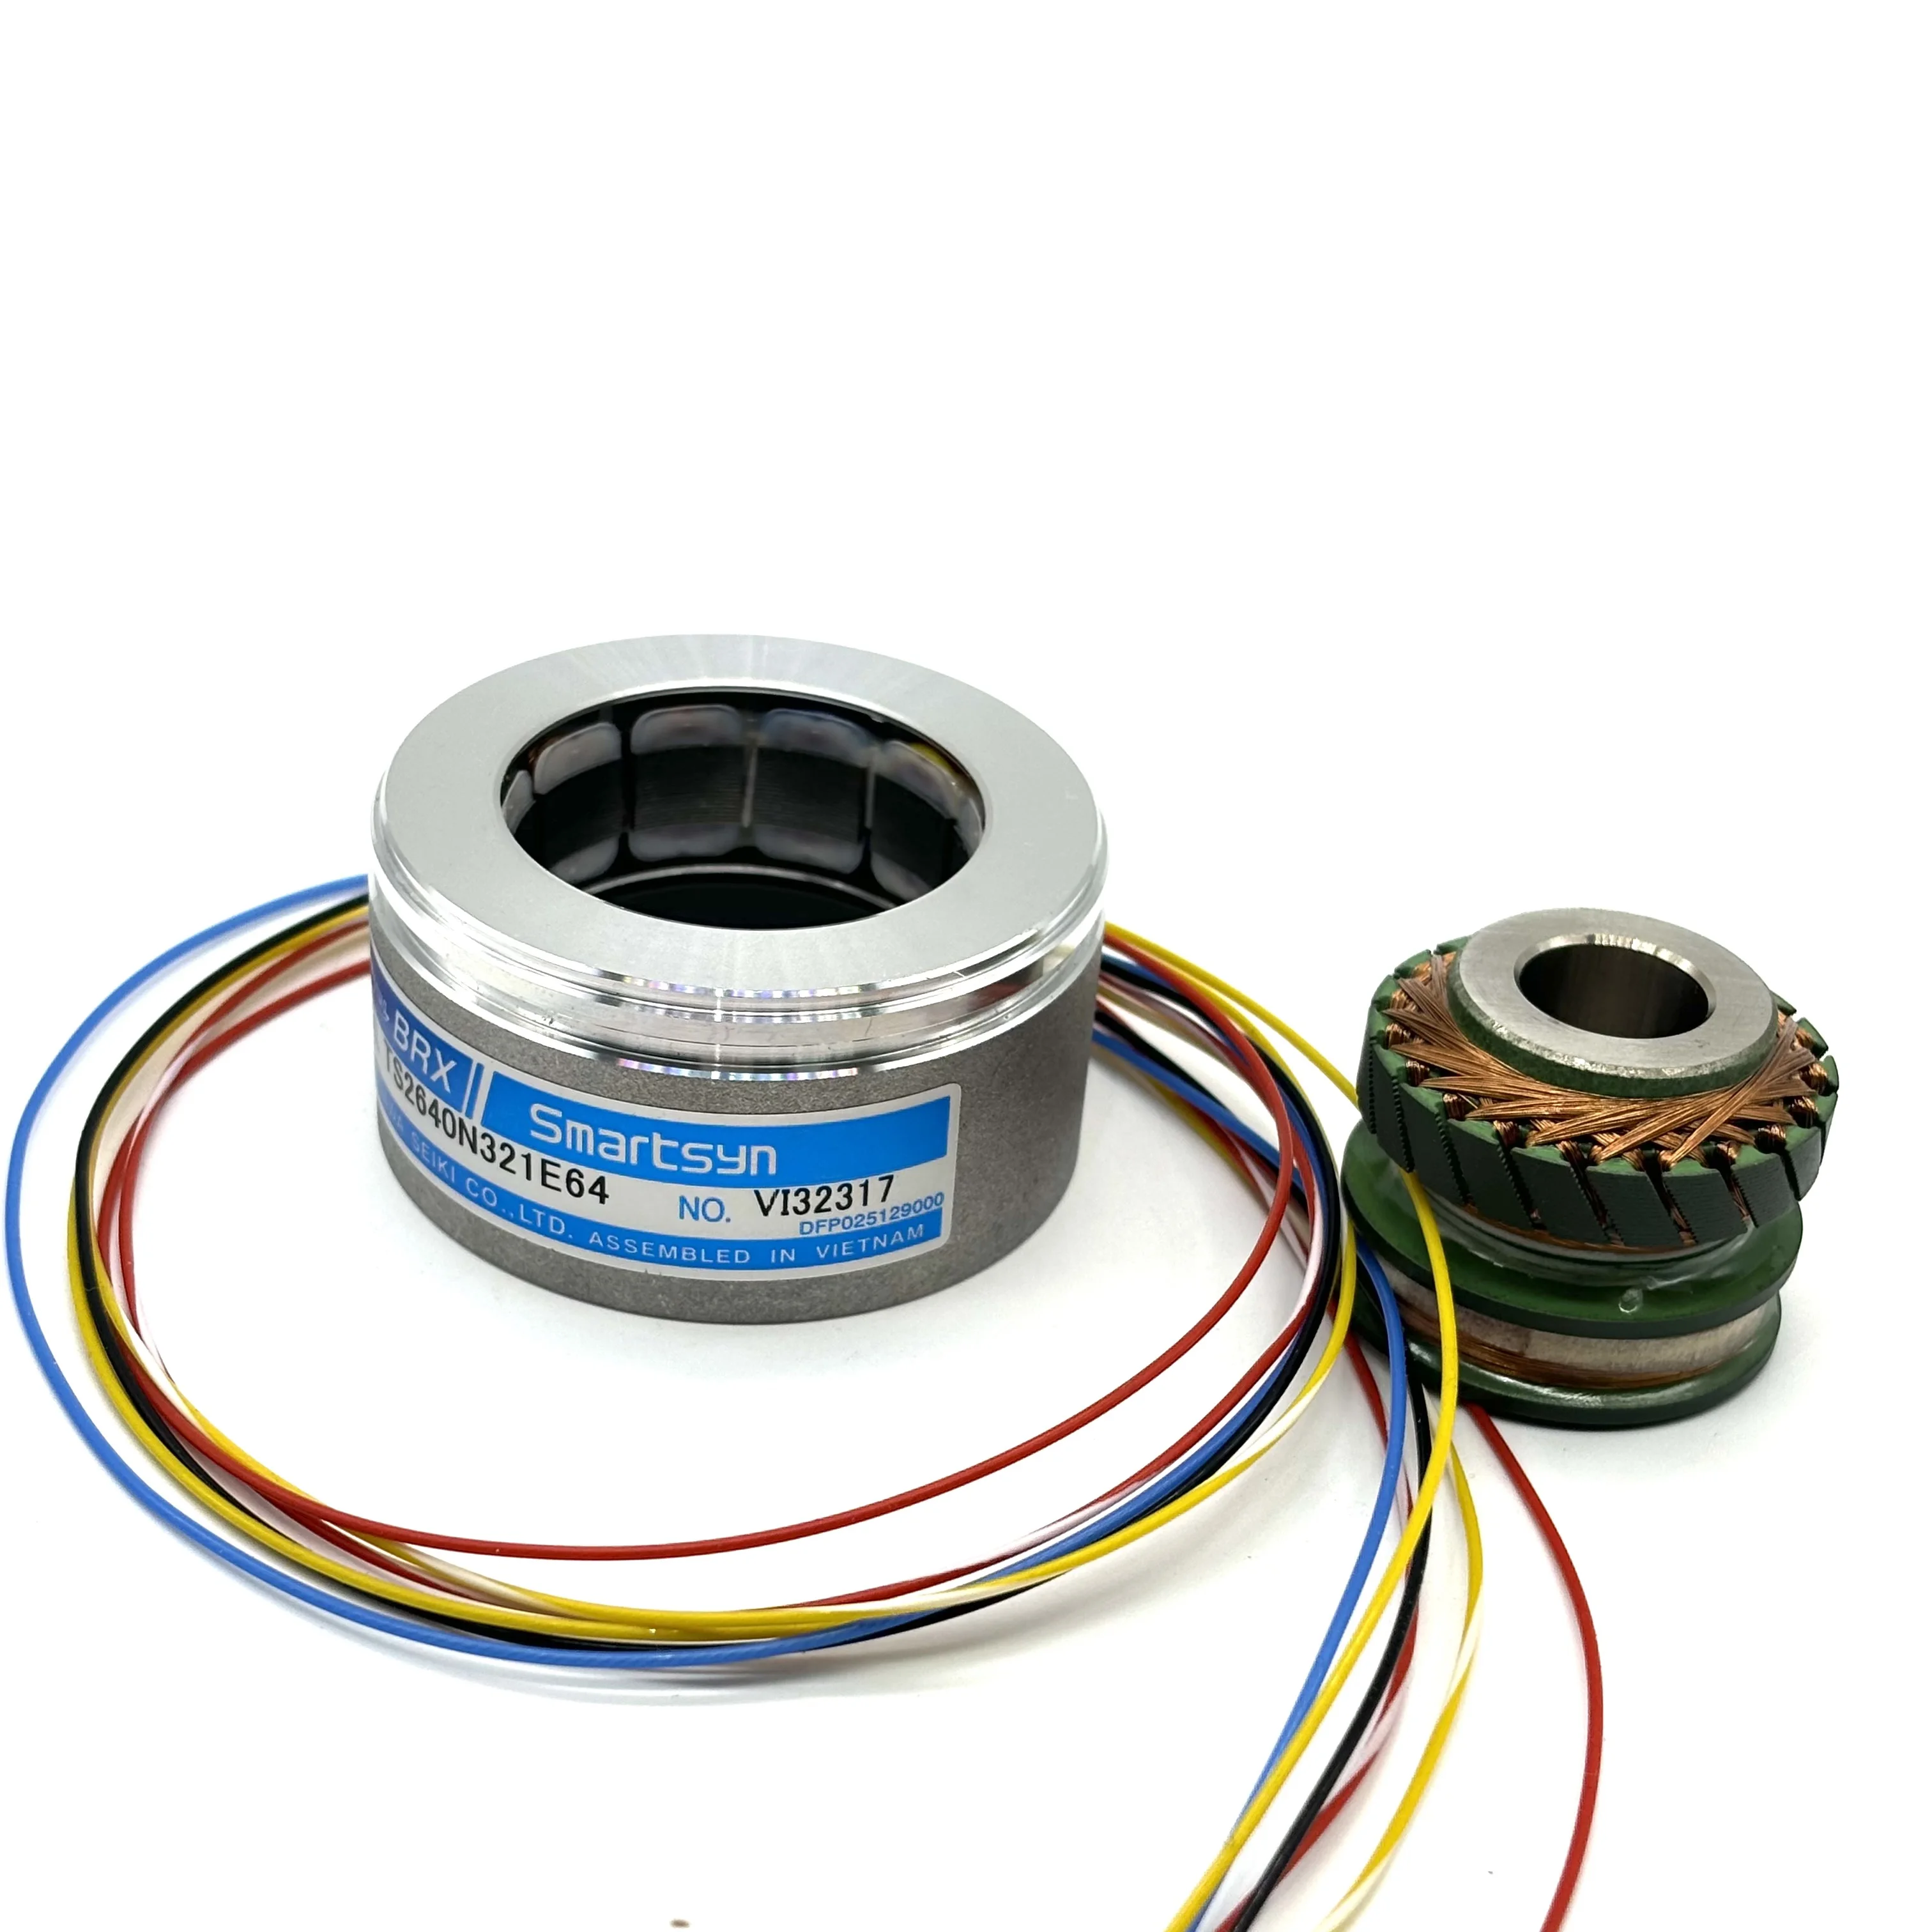 

TS2640N321E64 encoder with Built-in resolver rotary encoder and resolvers